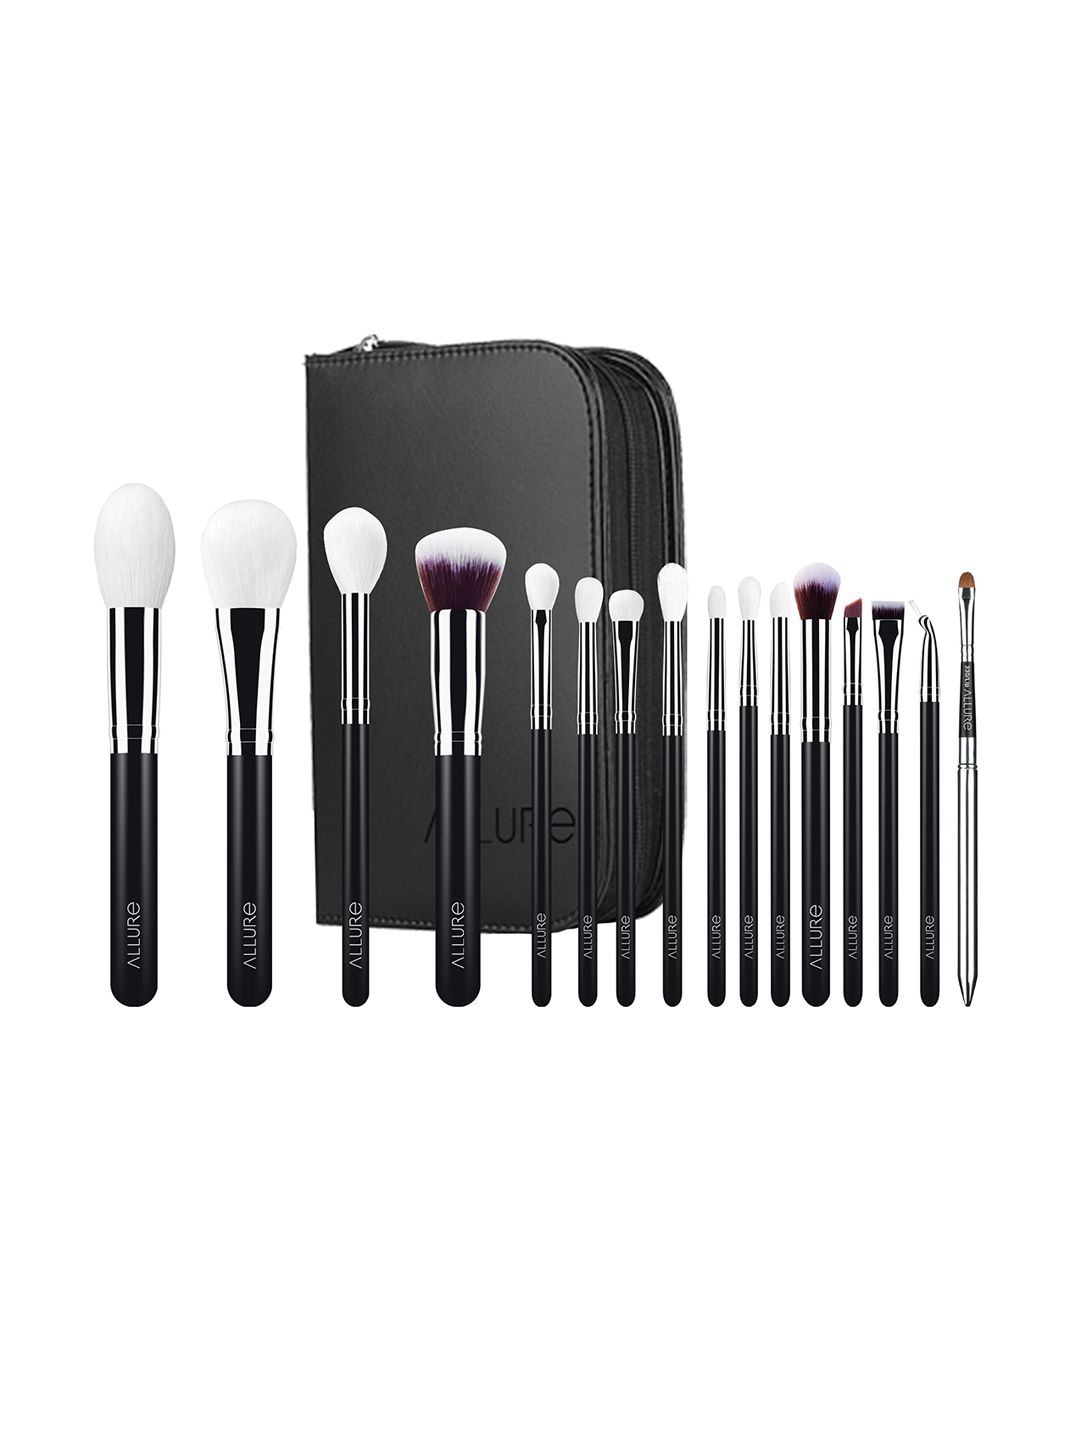 ALLURE Black Set of 16 Make Up Brushes Price in India